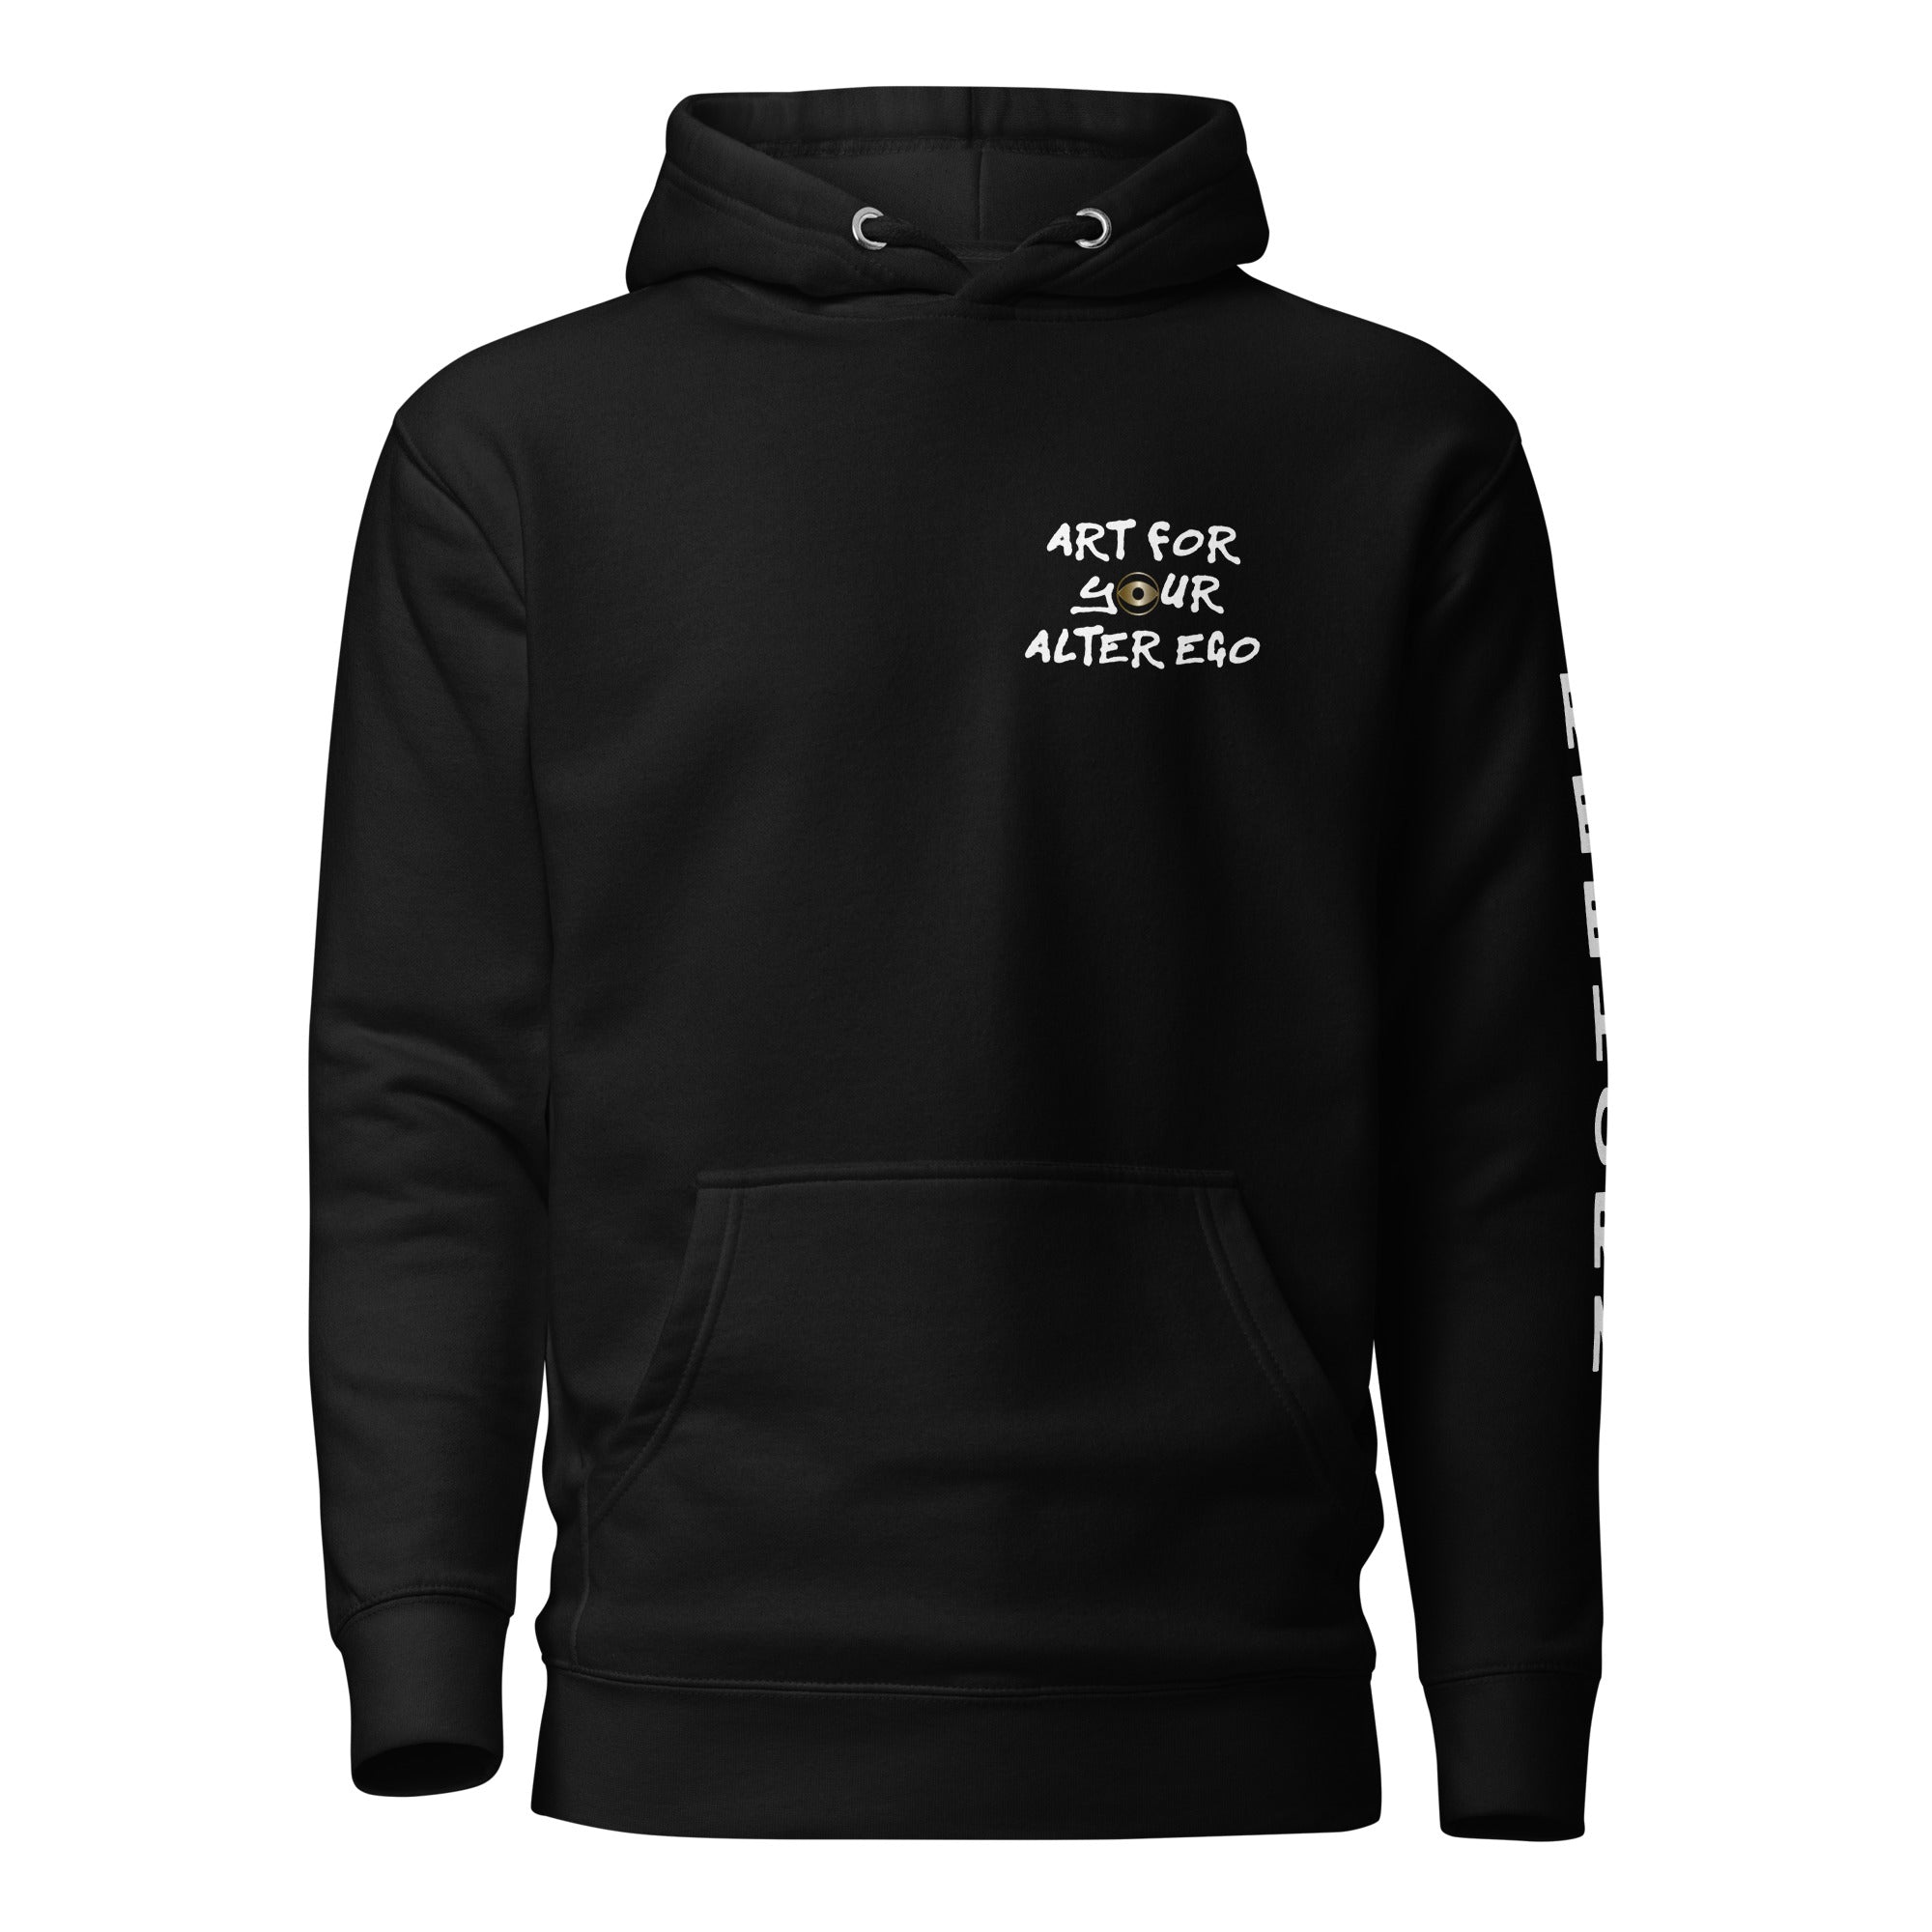 Make Your Moves in Silence Premium Unisex Hoodie - REBHORN DESIGN